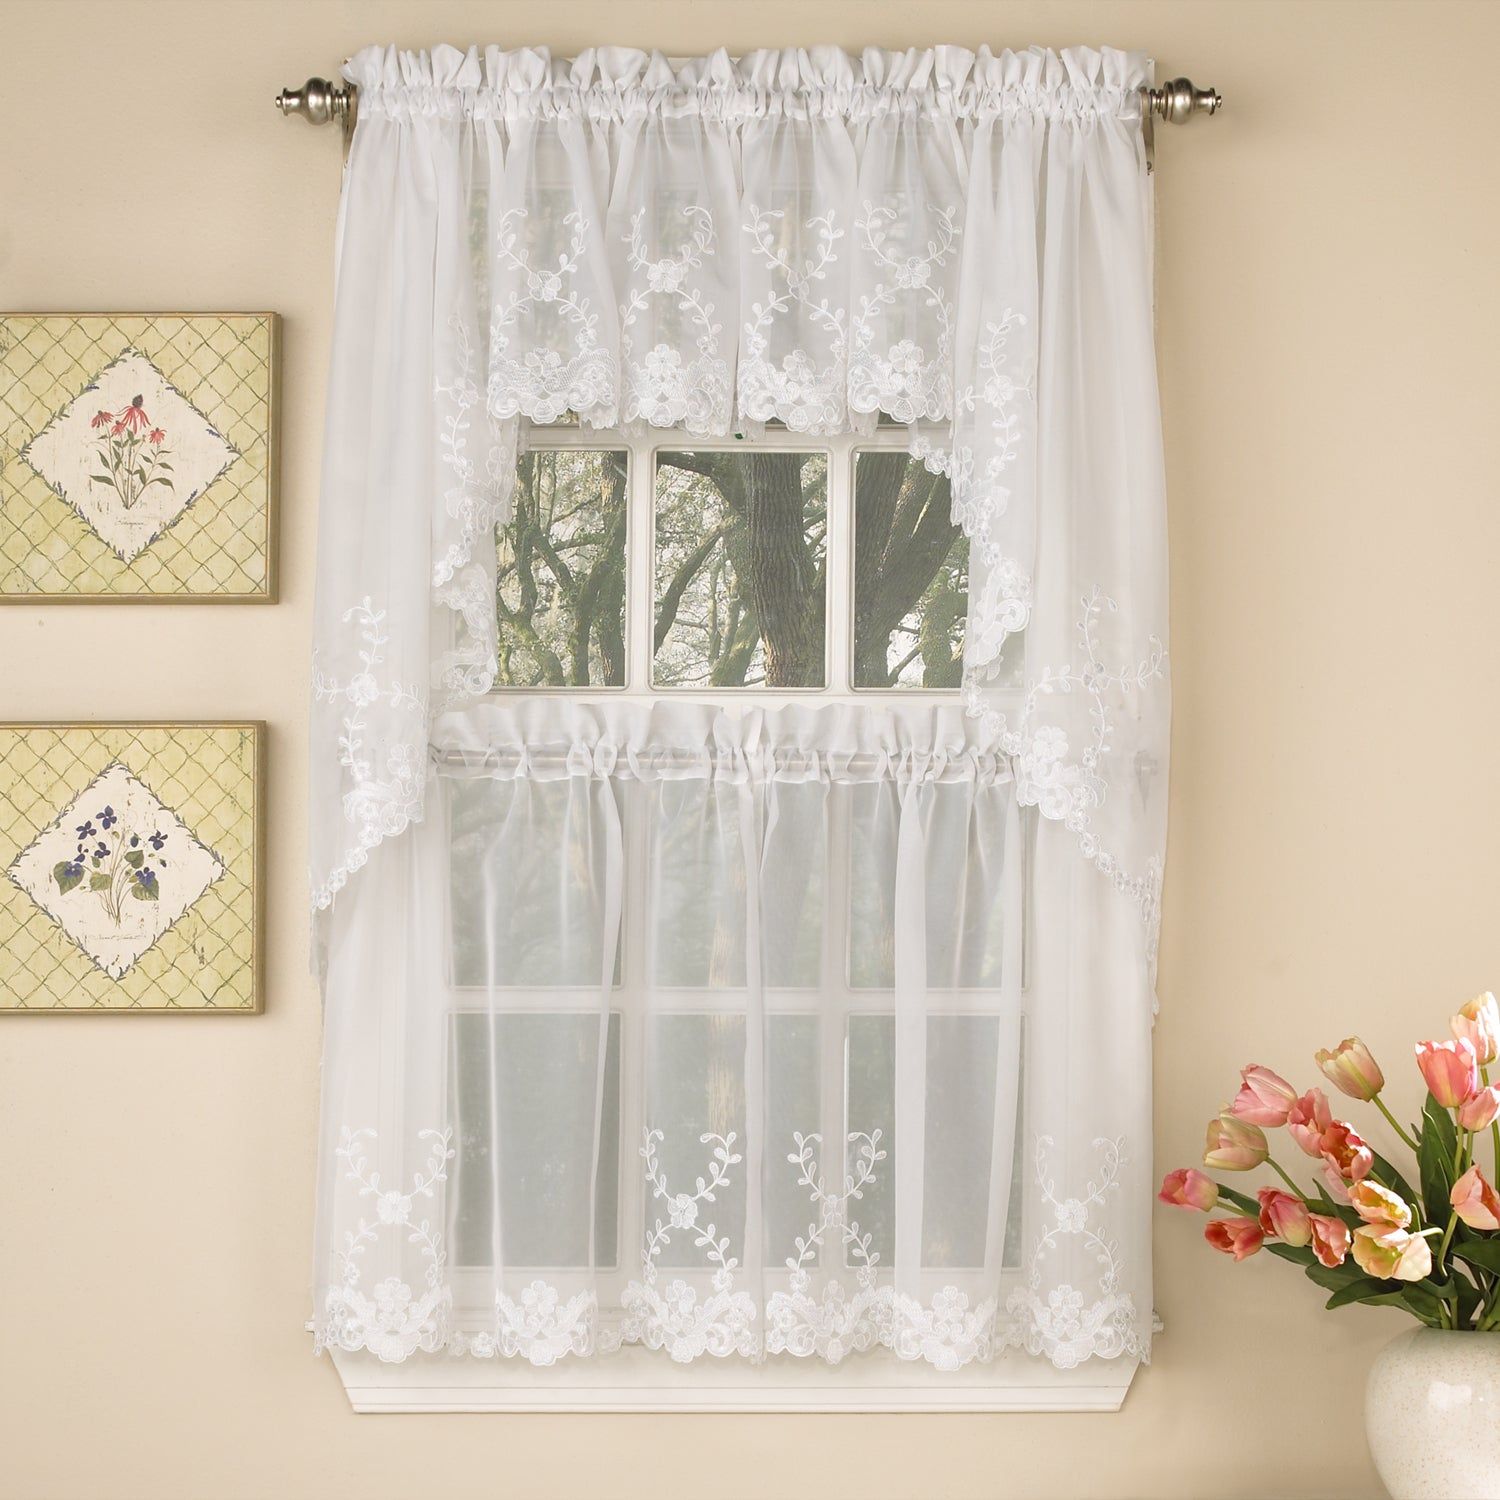 Sheer Voile Embroidered Scrolling Floral Leaf Pattern Window Curtain Pieces  – Tiers, Valance And Swag Pair Options In Floral Pattern Window Valances (View 20 of 20)